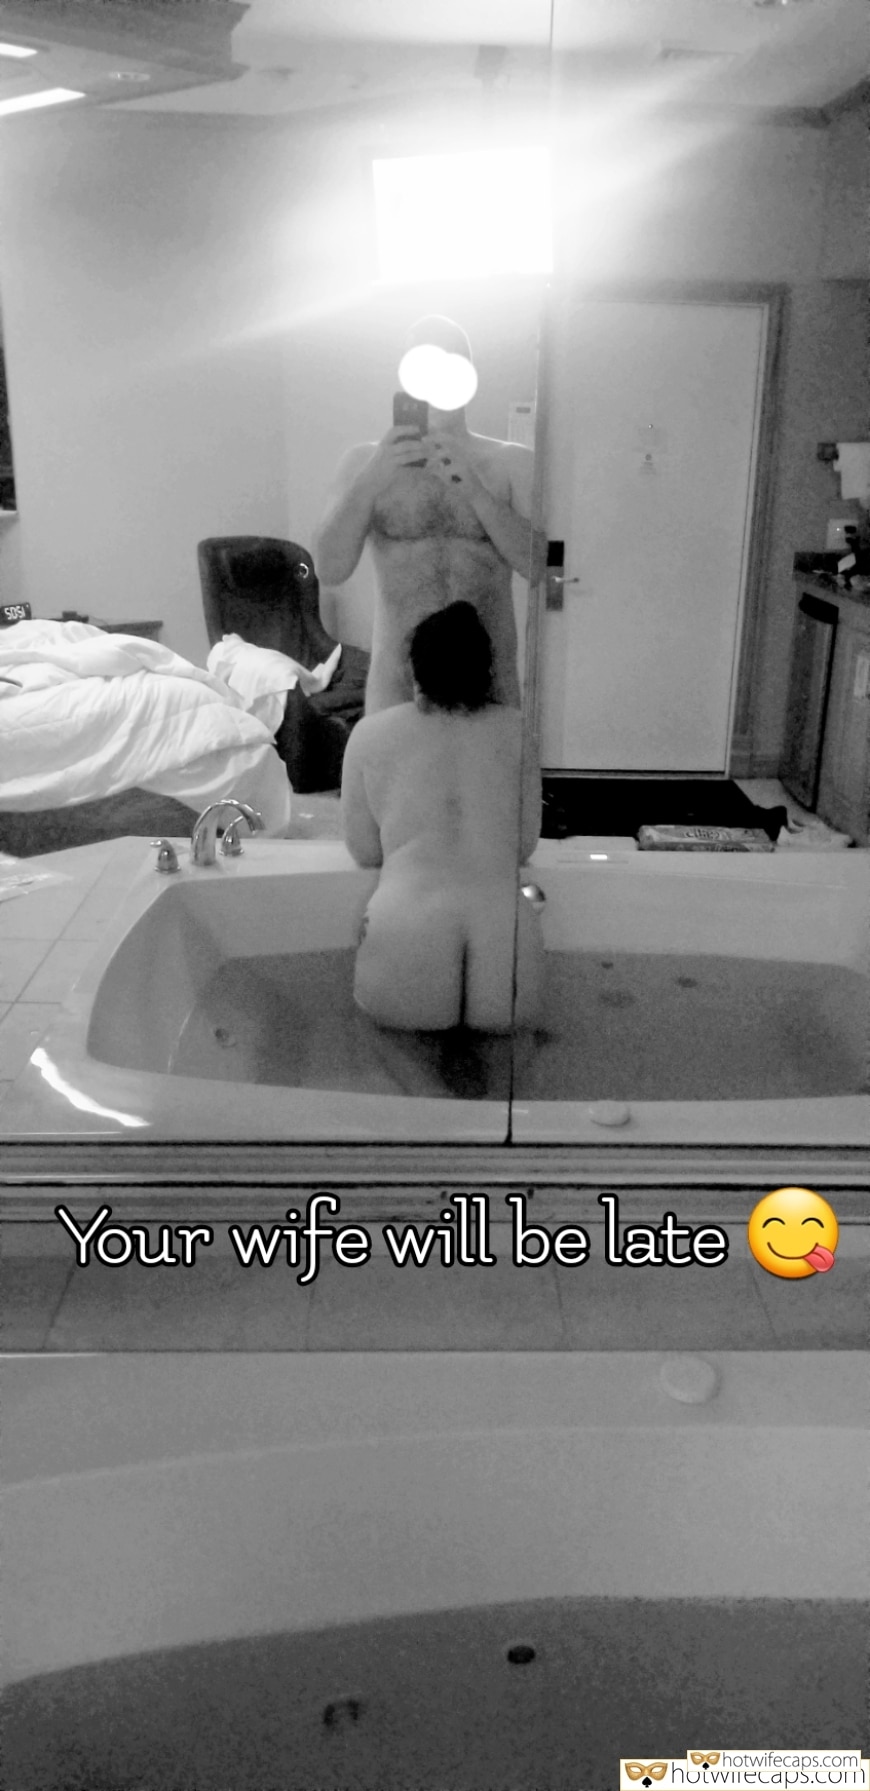 Humiliation Cheating Bully Bottomless Blowjob hotwife caption: SOSI Your wife will be late n hotwifecaps.com After-Bar Knob